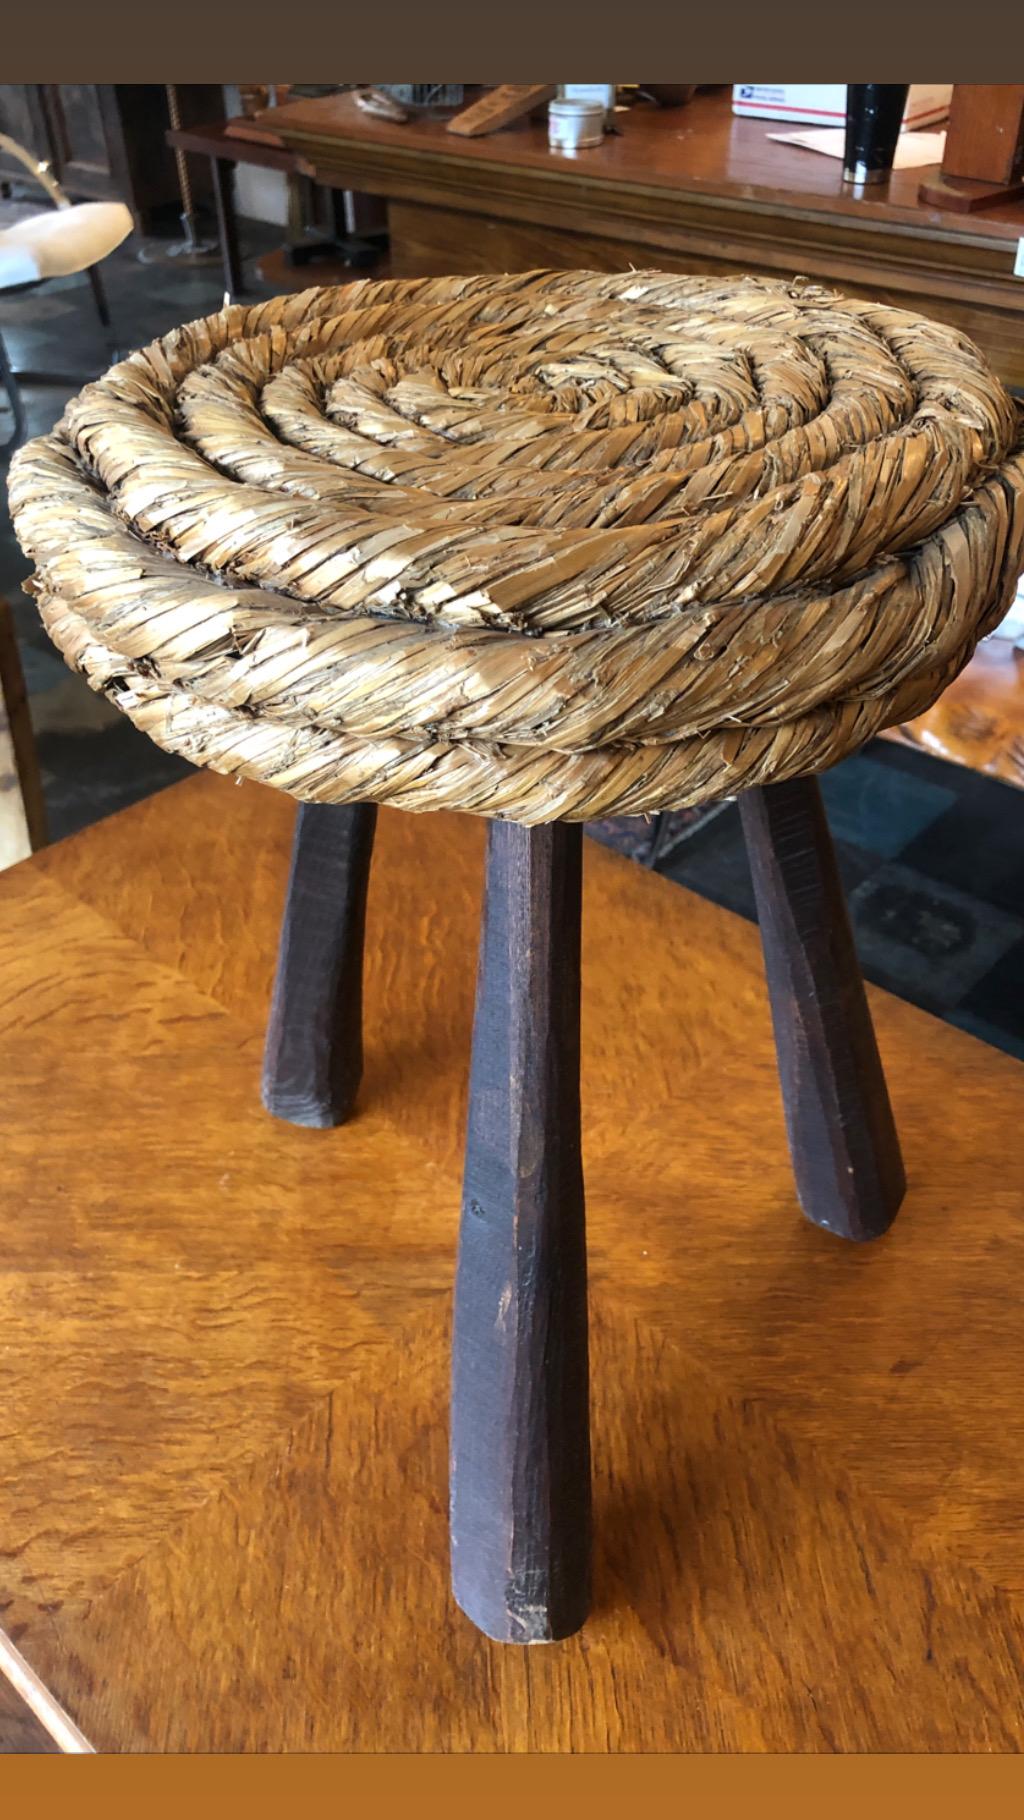 This is a lovely midcentury braided rush stool by French designers Adrien Audoux and Frida Minet.